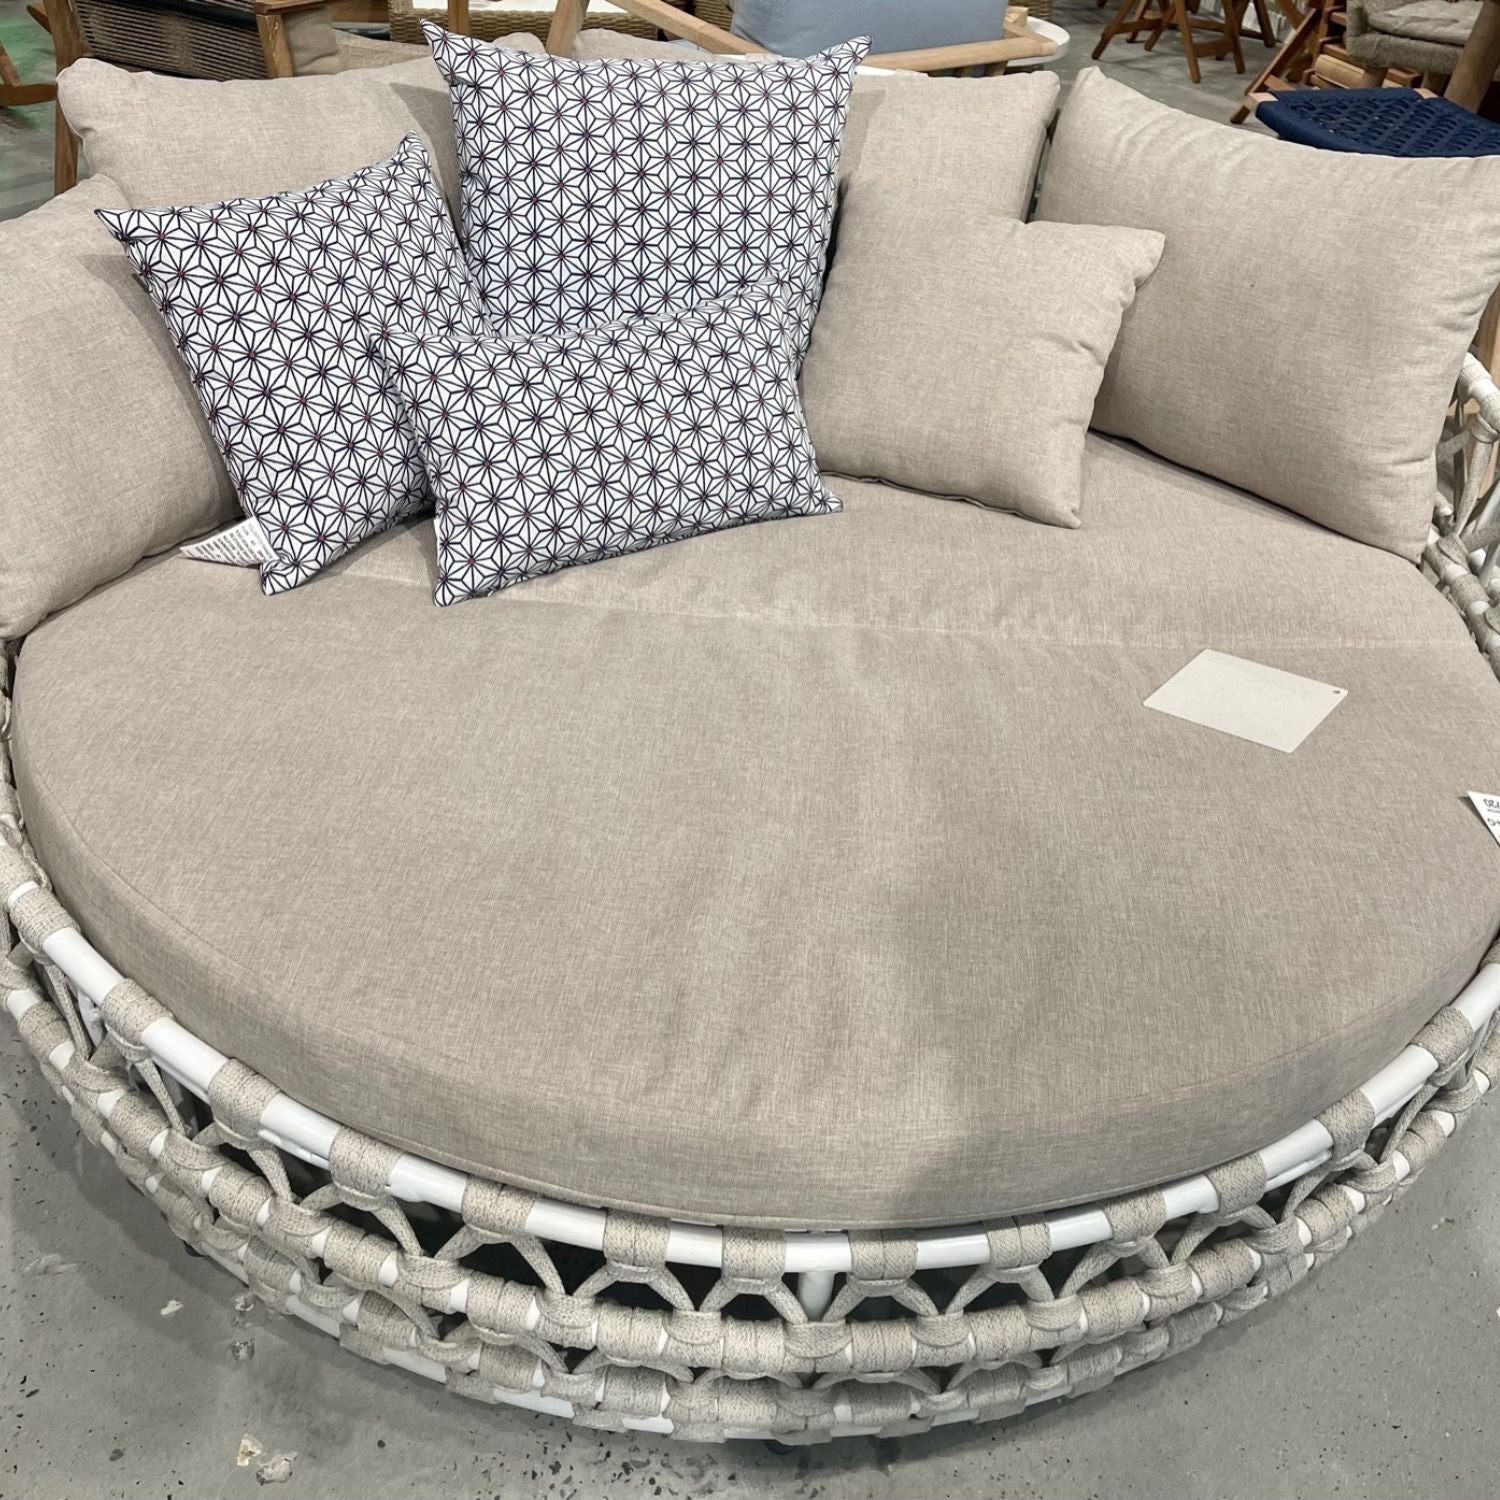 Round Outdoor Daybed, accent pillows, rust resistant,  Riviera Outdoor Decor, Port Aransas, Texas